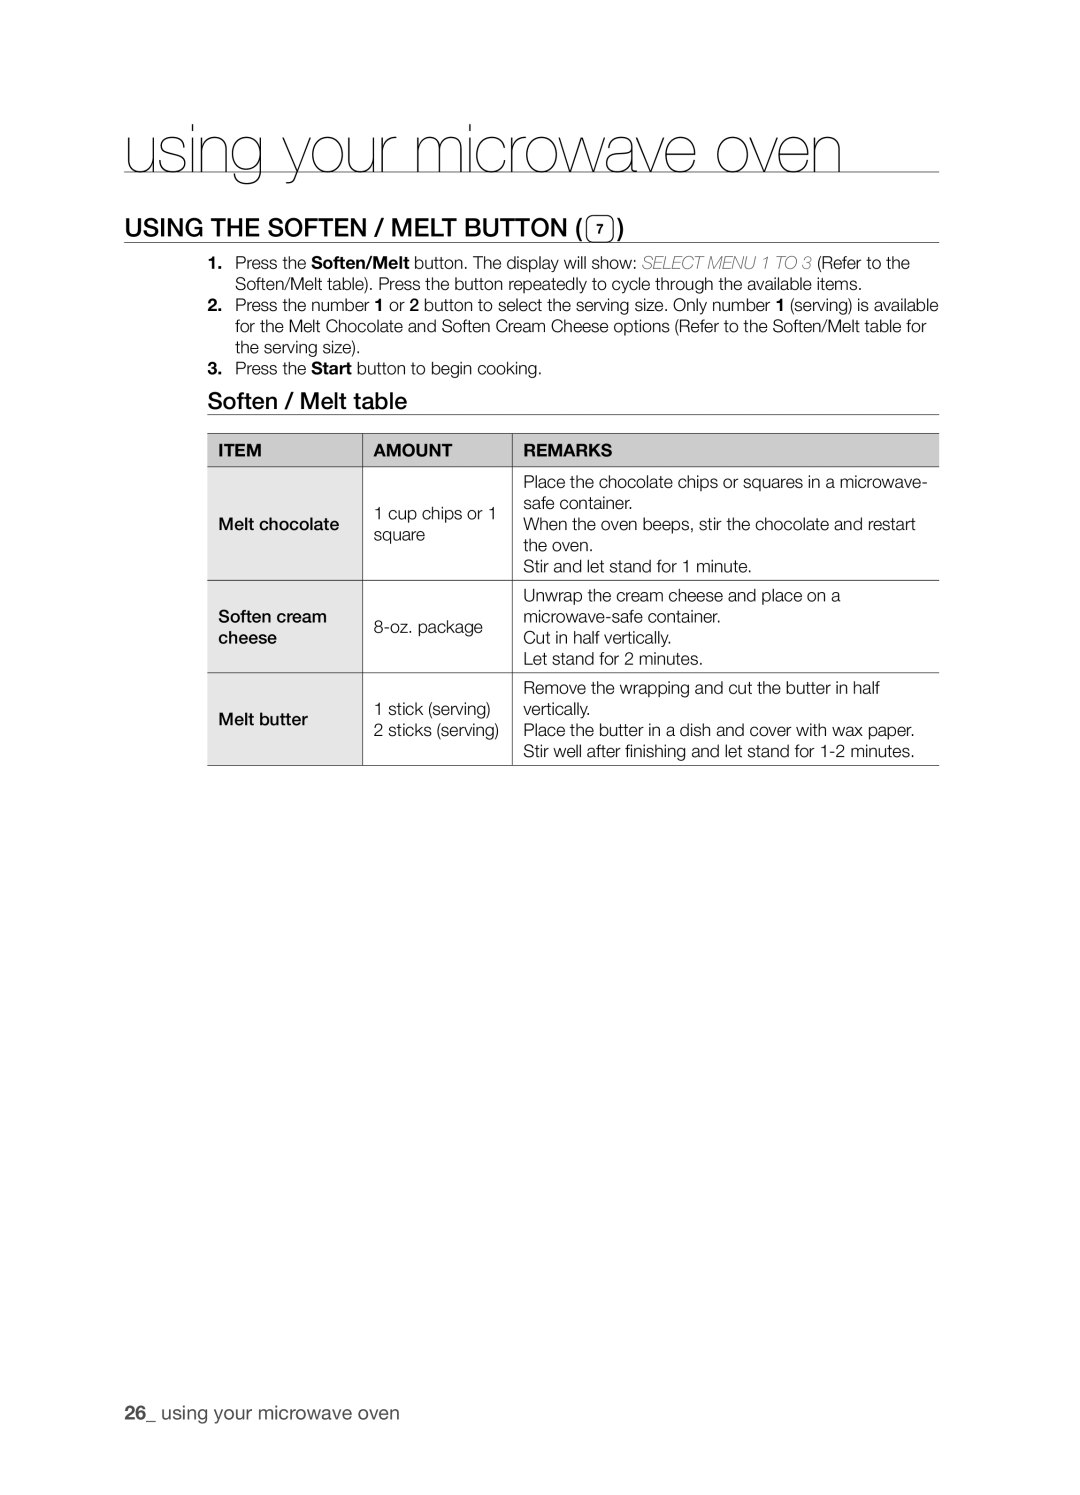 Samsung SMH9207ST user manual Using The Soften / Melt Button, Soften / Melt table, using your microwave oven 